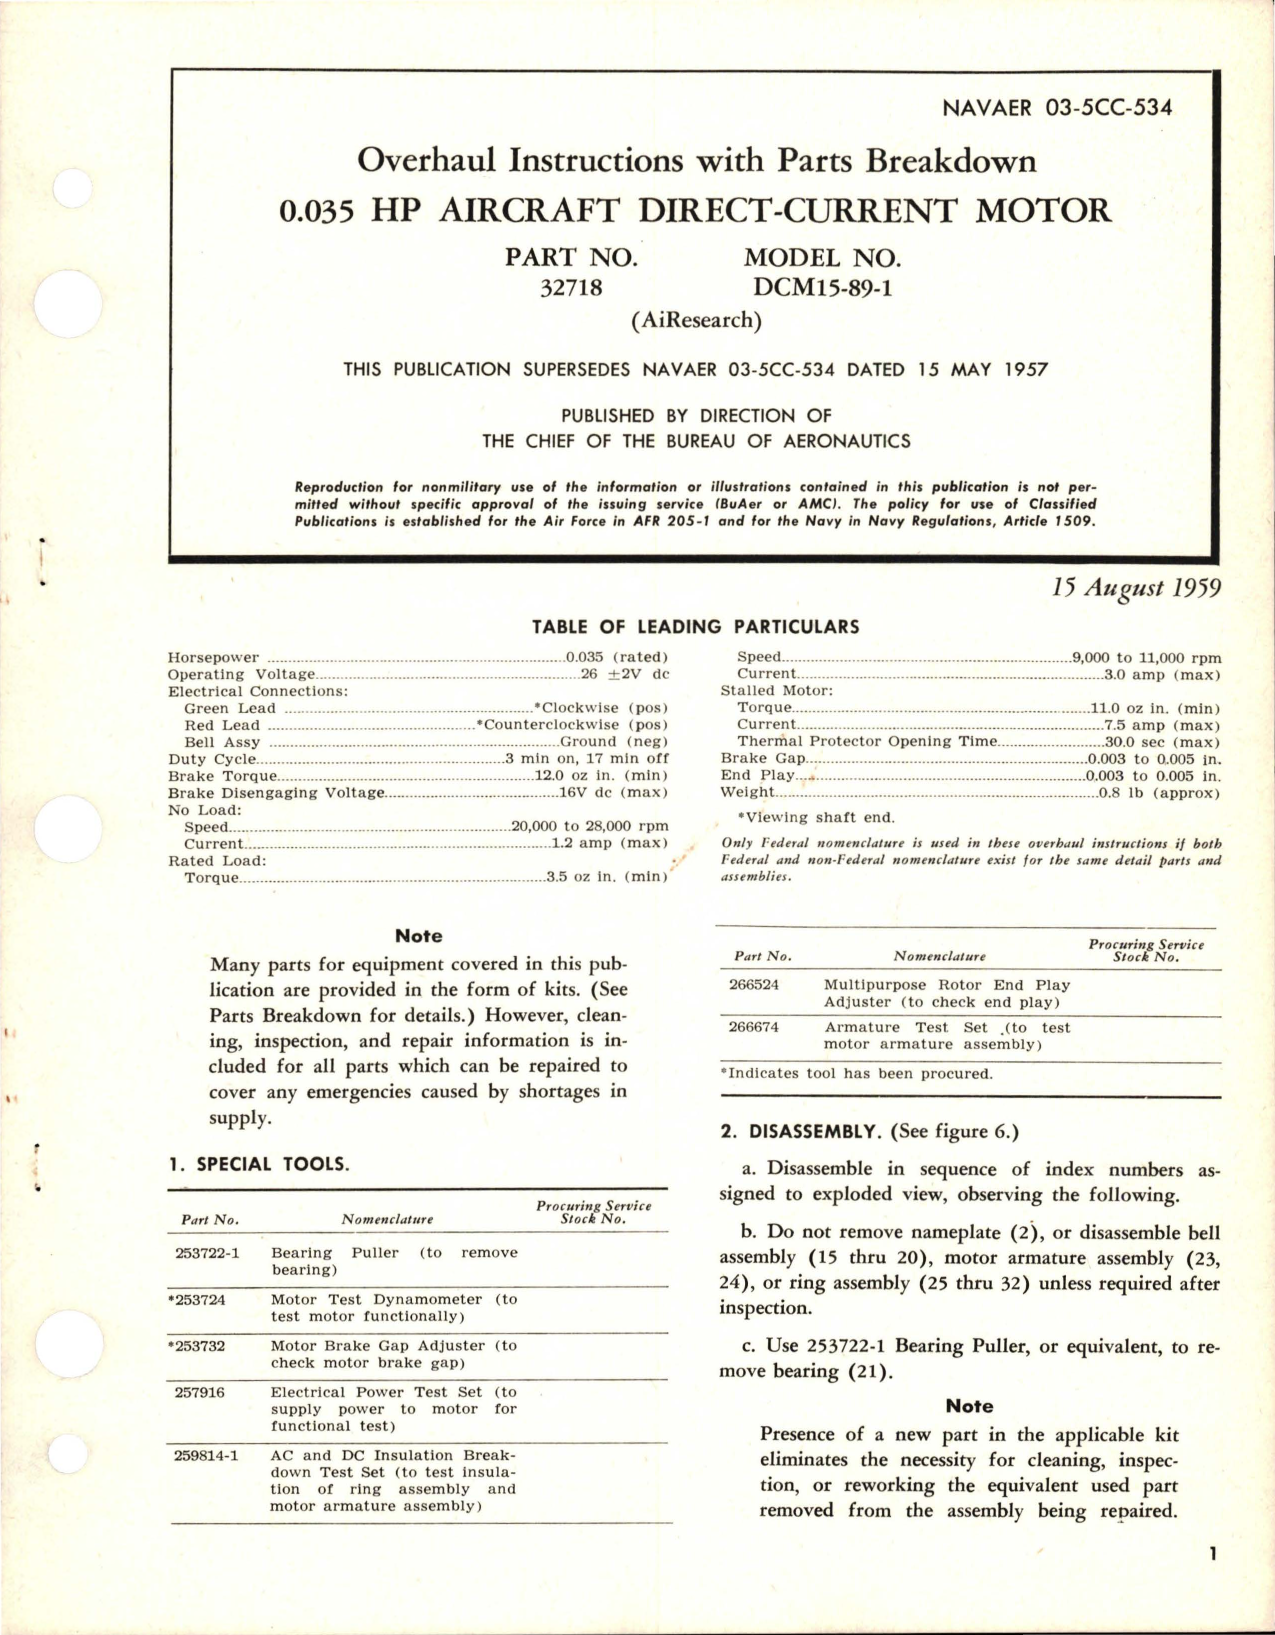 Sample page 1 from AirCorps Library document: Overhaul Instructions with Parts Breakdown for Direct Current Motor - 0.035 HP - Part 32718 - Model DCM15-89-1